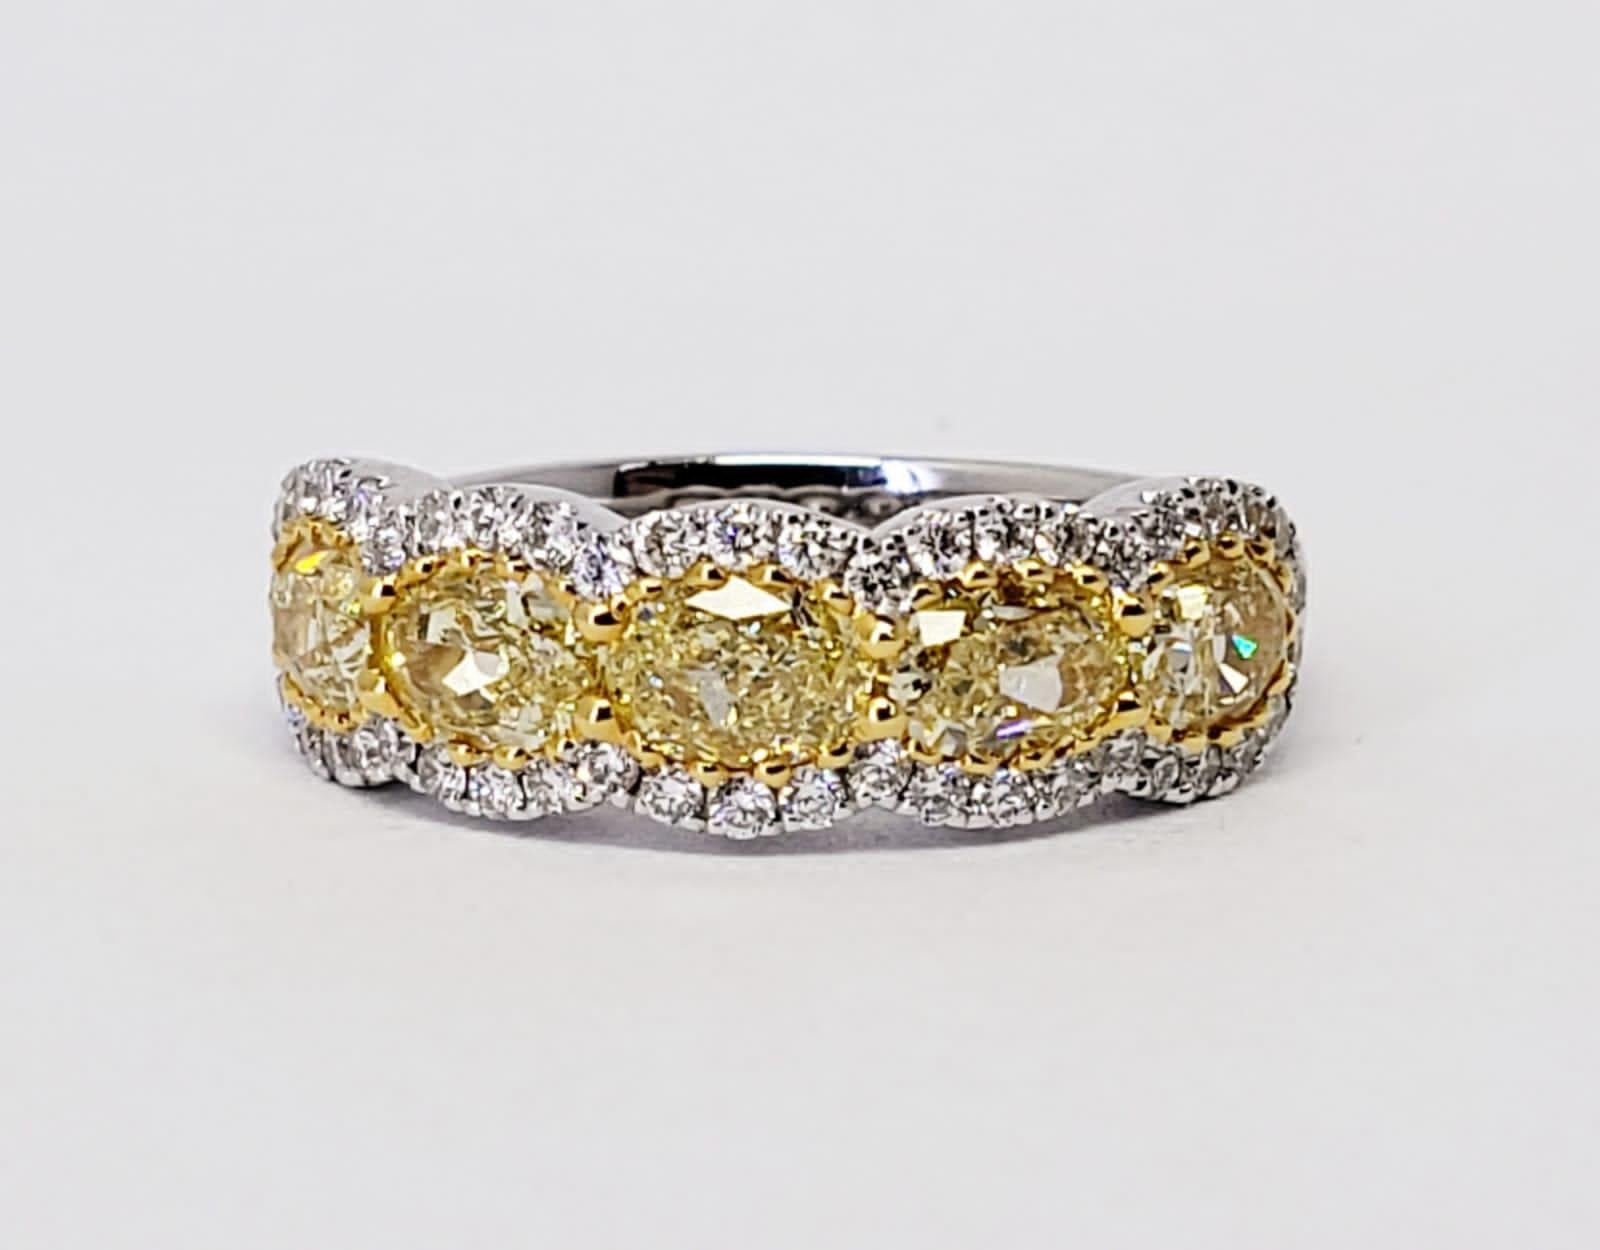 Rosenberg Diamonds & Co. 1.94 total carat weight Oval cut Fancy Intense Yellow VS2 clarity. This beautiful yellow diamond halfway wedding band is set in a handmade 18 karat white & yellow gold setting, with five carefully matched oval shape diamonds